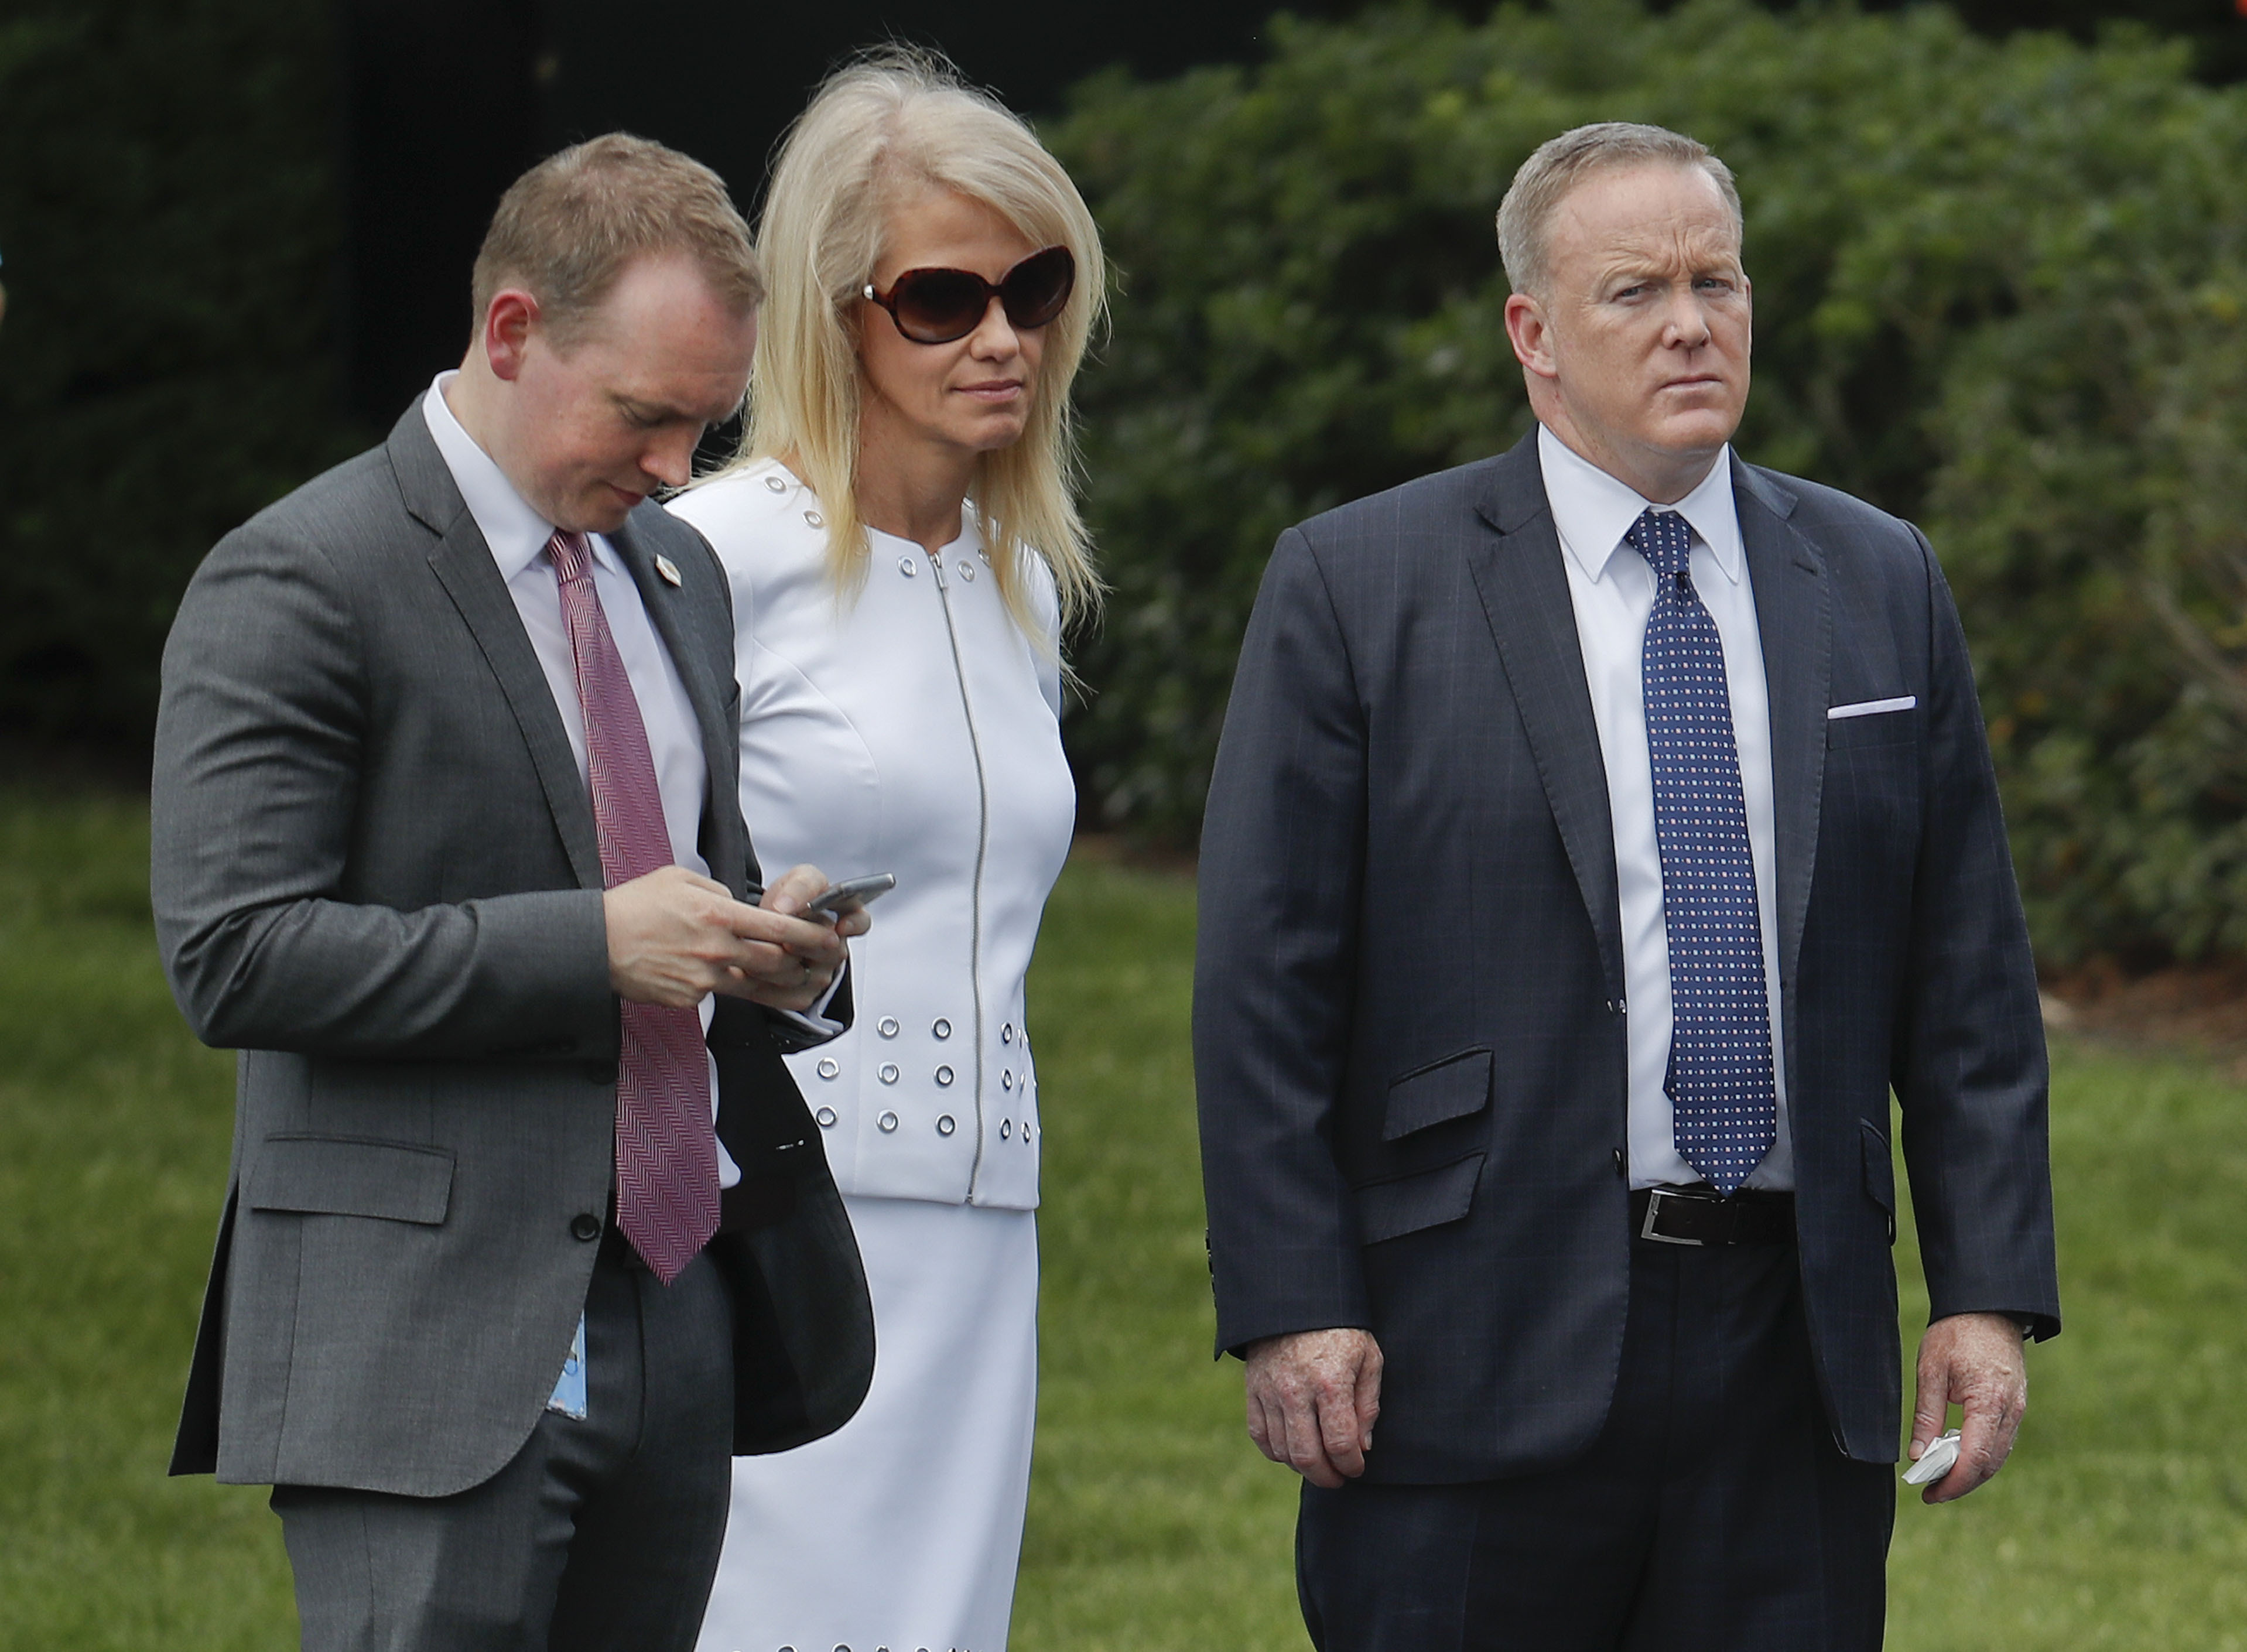 in this file photo, Cliff Sims, left, then-Director of White House Message Strategy, stands with Kellyanne Conway, center, senior adviser to President Donald Trump, and former White House Press Secretary Sean Spicer, right, as they listen to President Donald Trump during a ceremony on the South Lawn of the White House in Washington. Sims' new Trump tell-all, 'Team of Vipers,' digs into the people who surround the President. (Pablo Martinez Monsivais&mdash;AP)